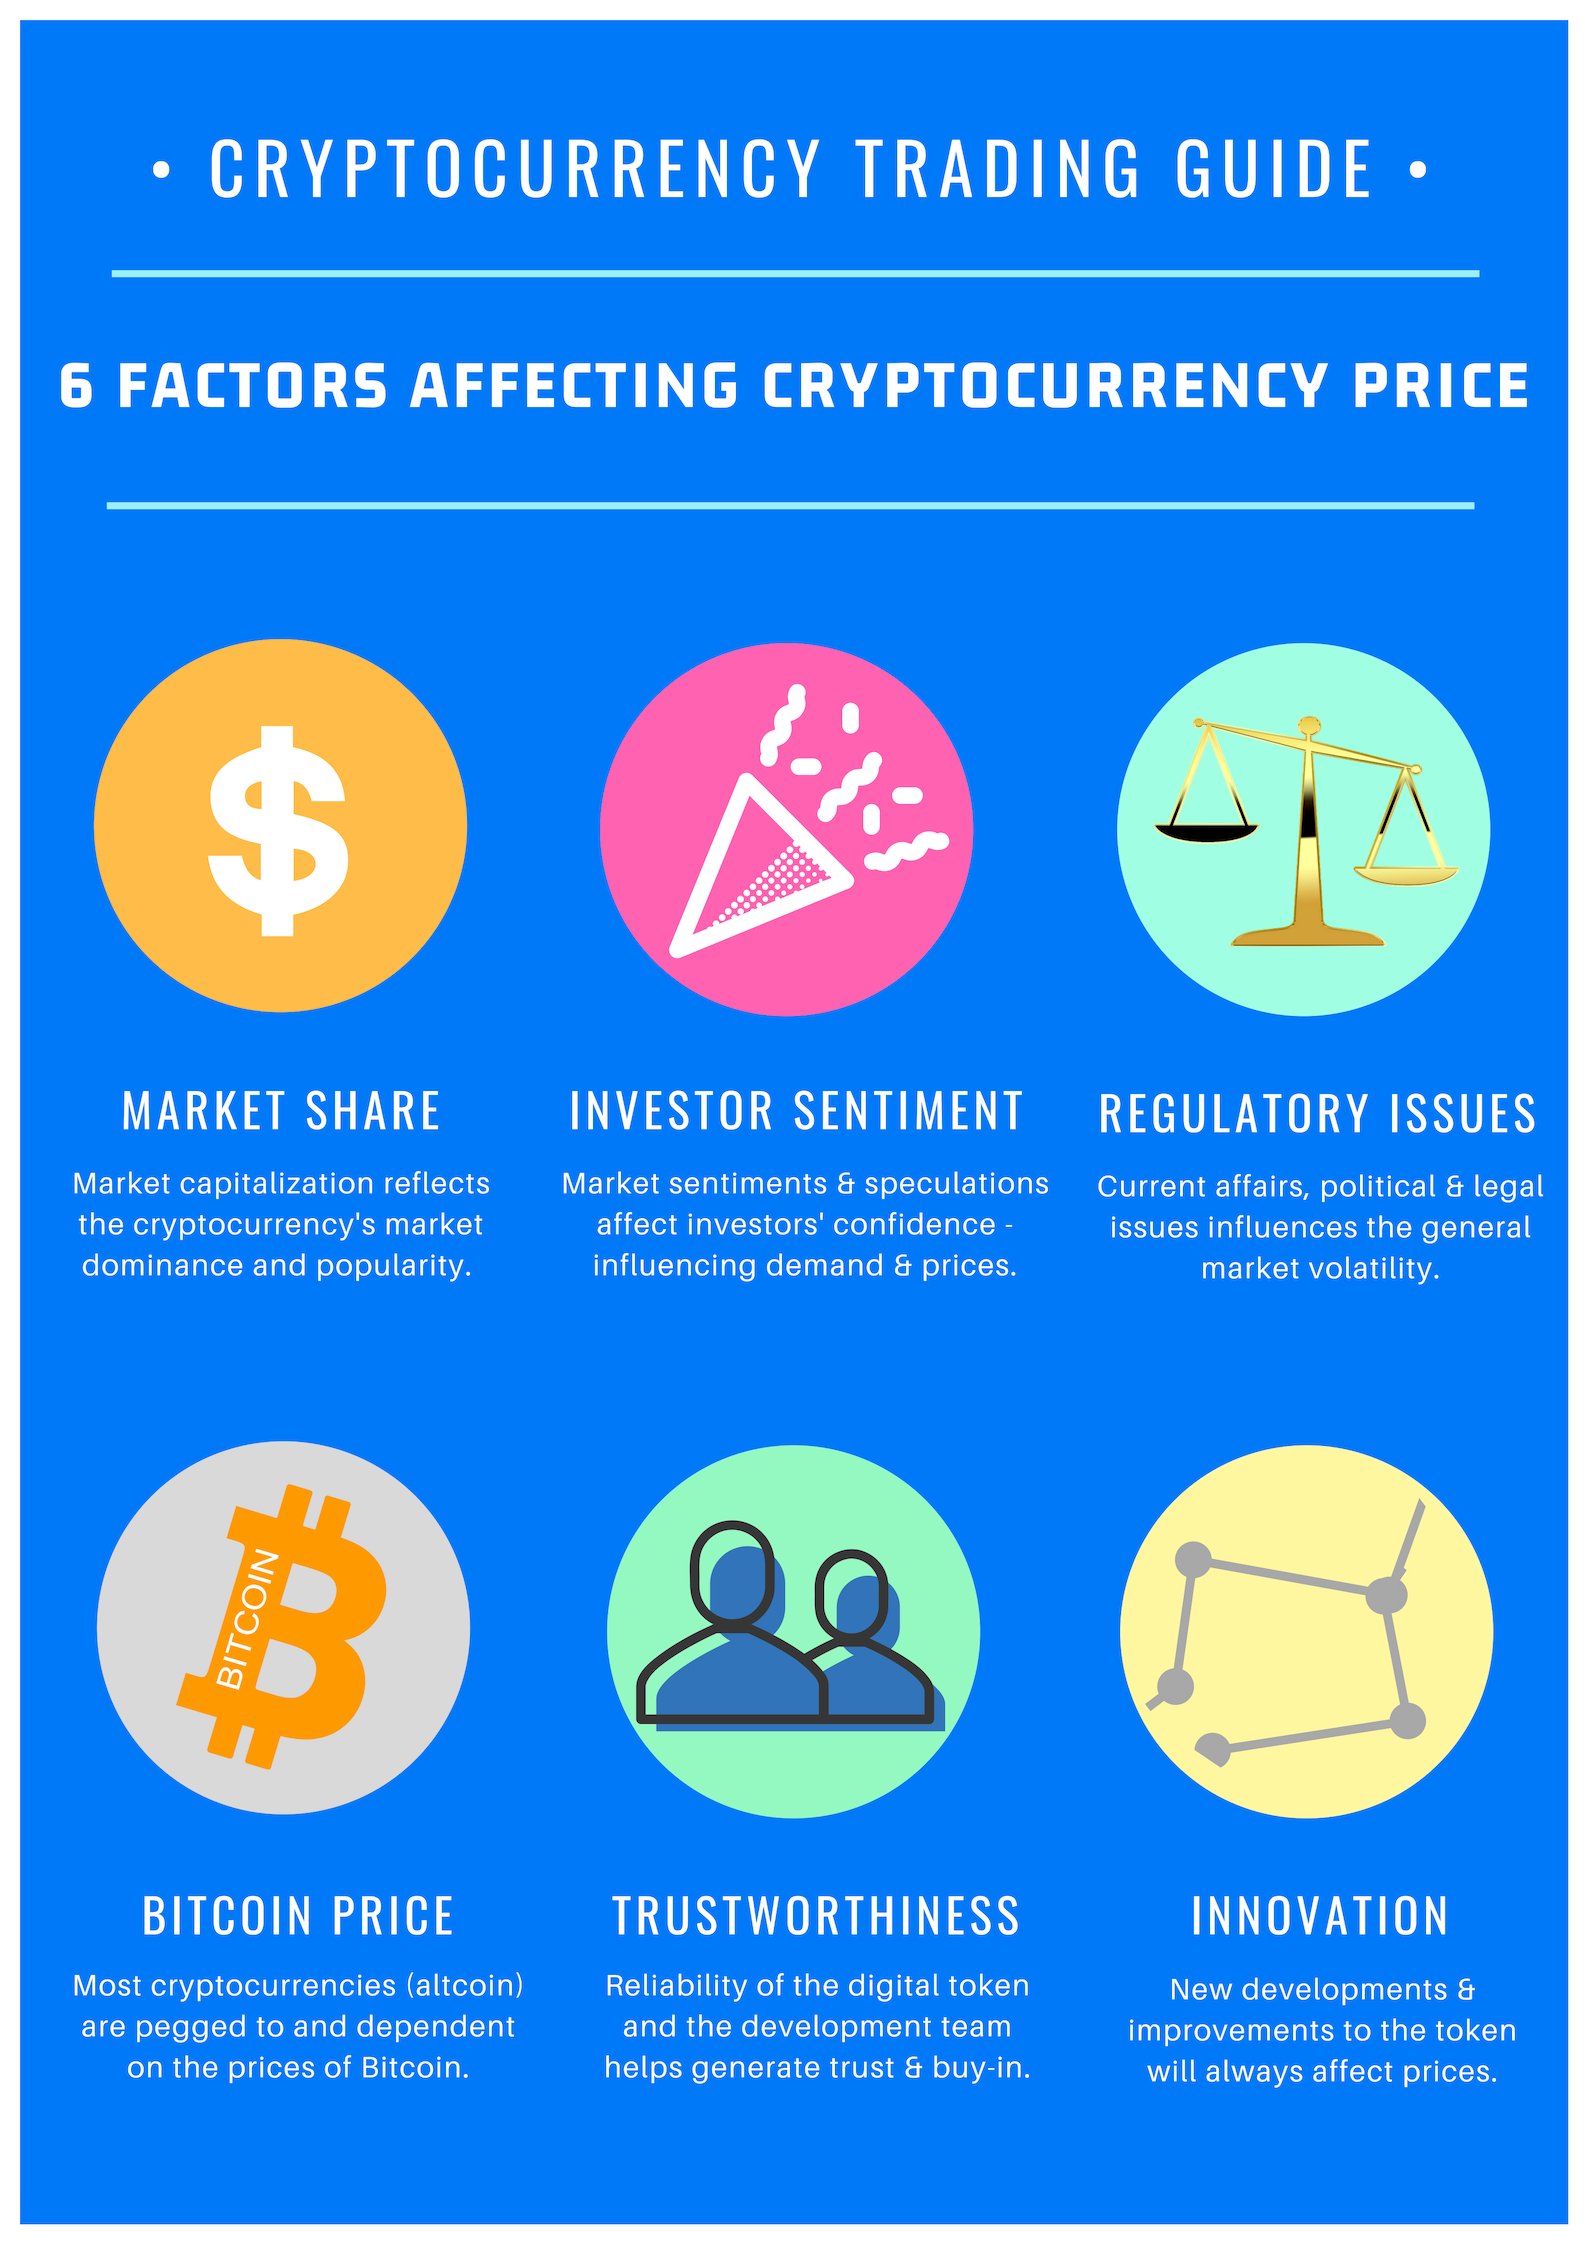 Trading-Guide-1---Factors-affecting-prices-2